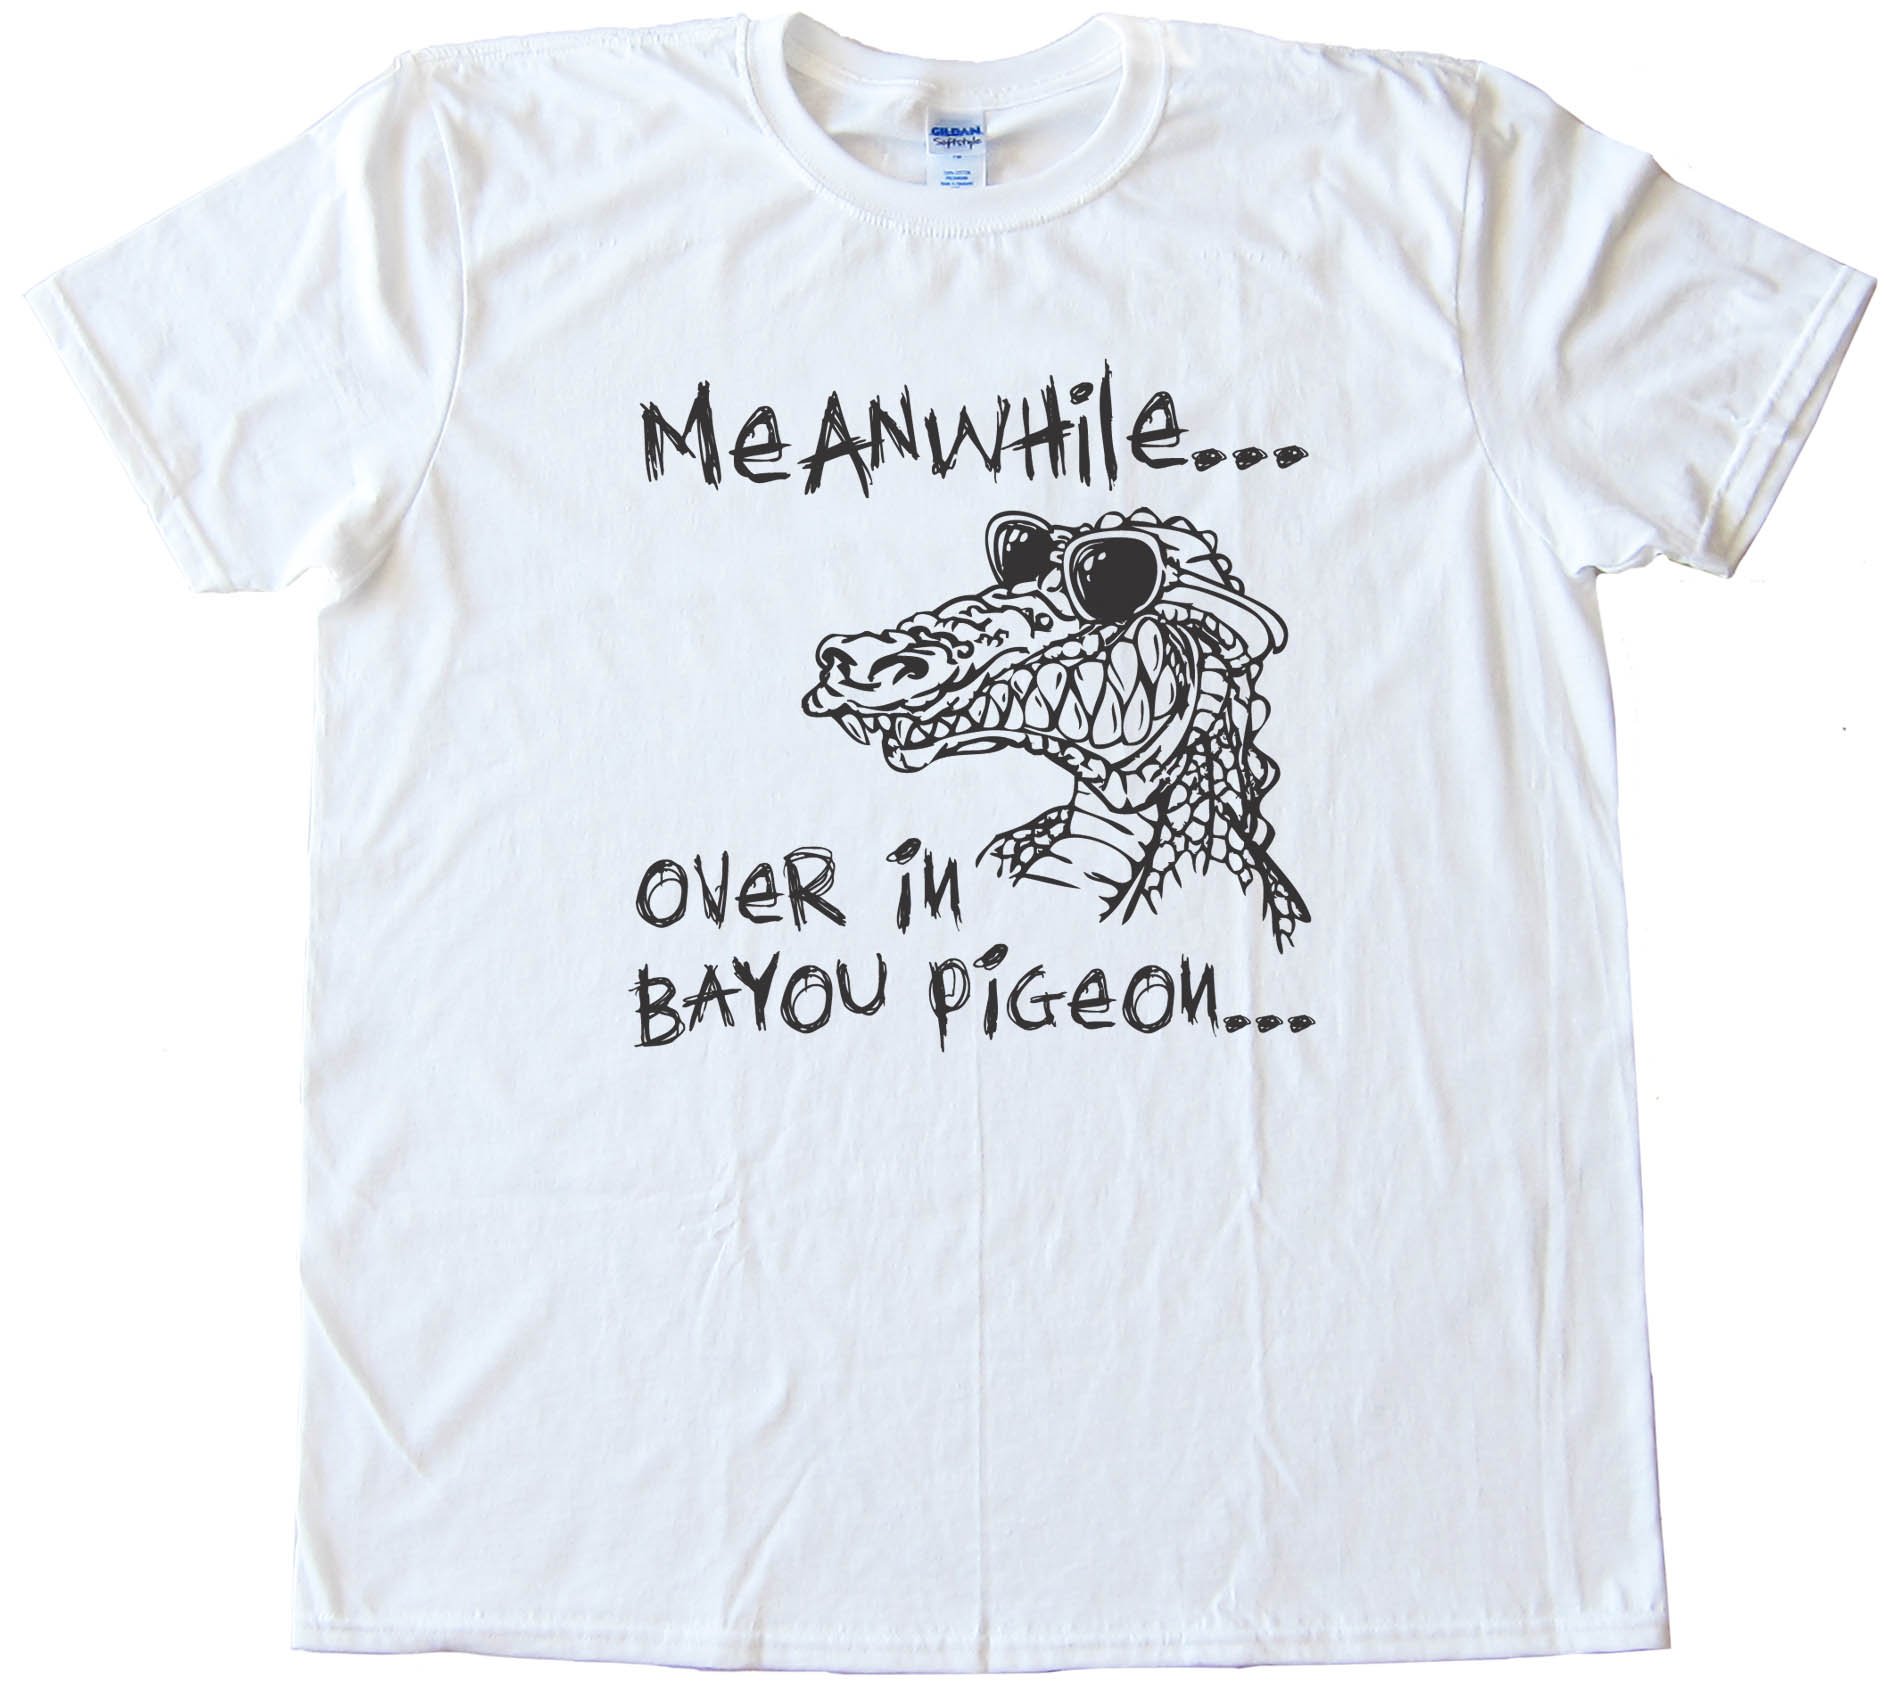 Meanwhile  Over In Bayou Pigeon - Swamp People - Tee Shirt